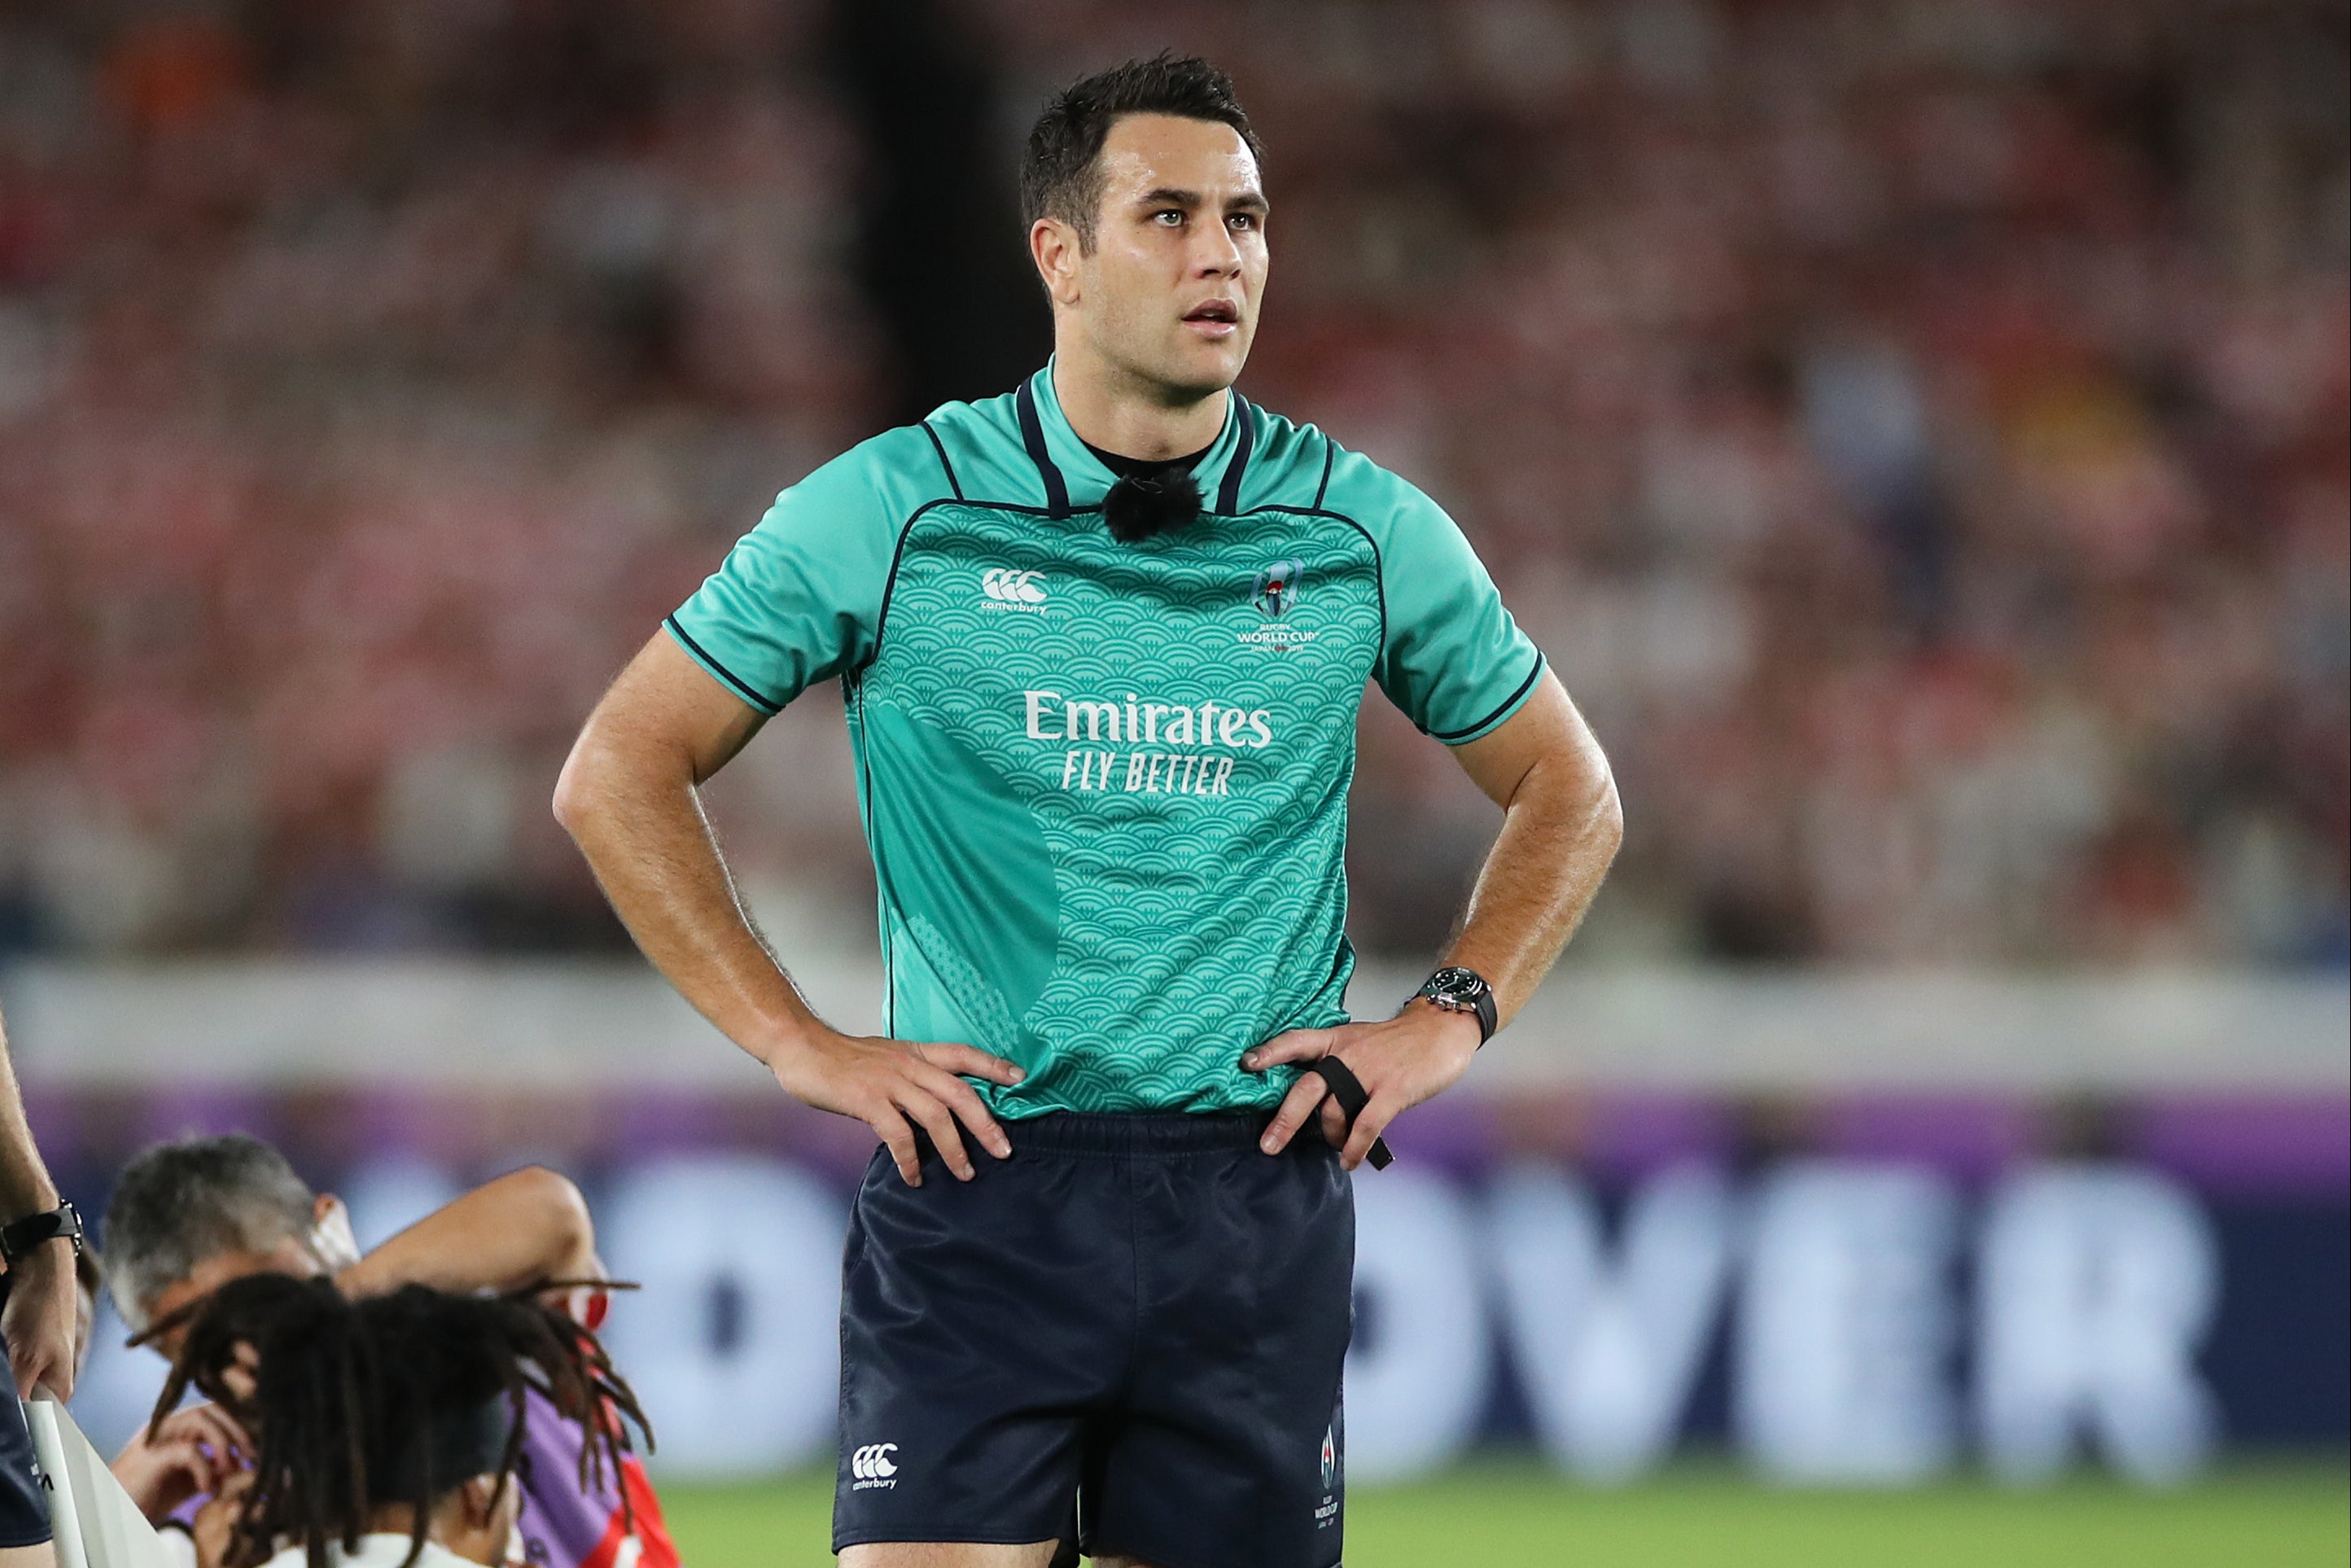 South Africa vs Ireland referee Who is Rugby World Cup official Ben OKeeffe? The Independent